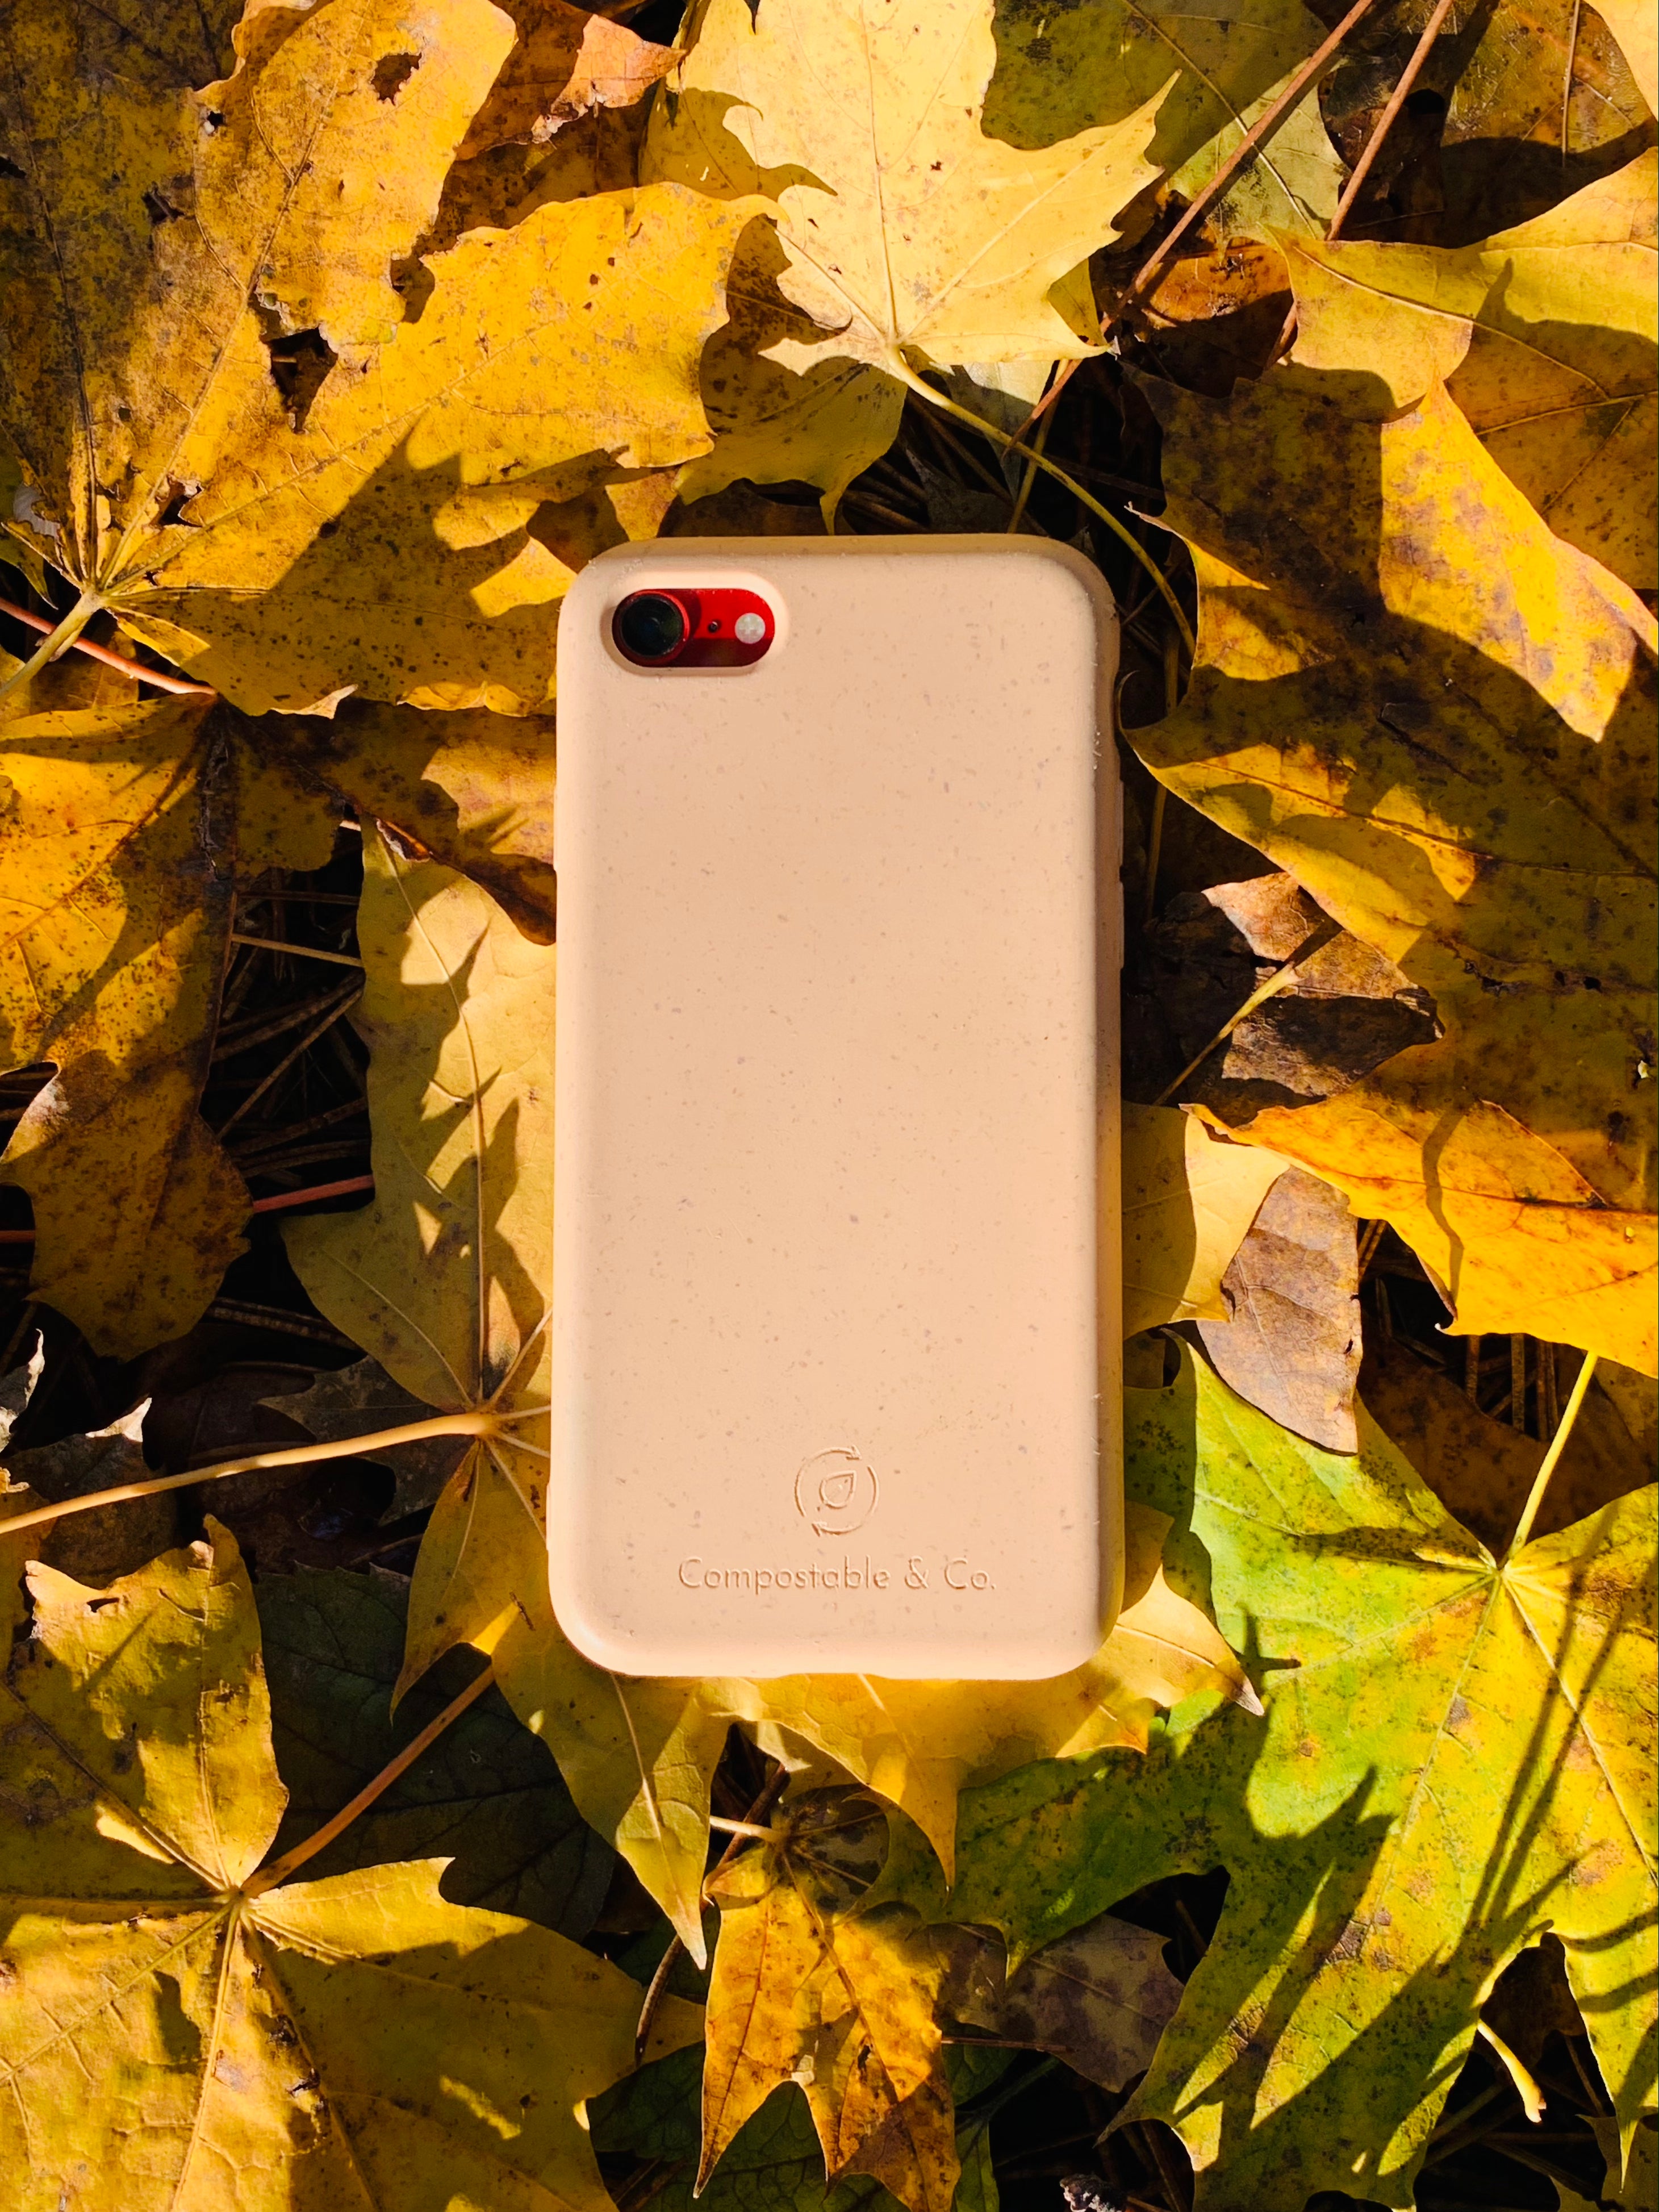 Compostable & Co. iPhone 7 / 8 / SE 2020 yellow biodegradable phone case with natural background